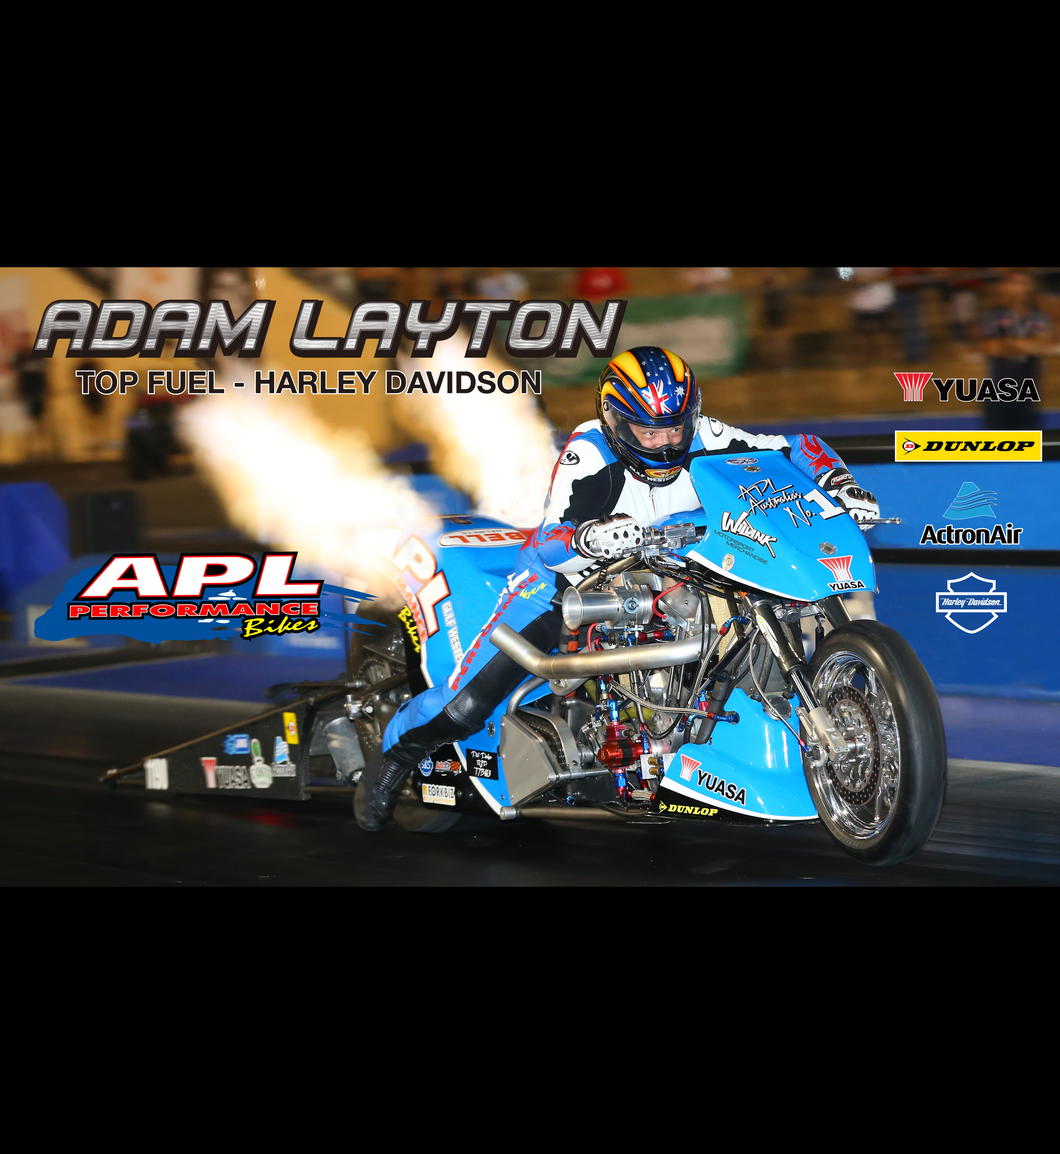 APL Performance - Top Fuel Motorcycle - Banner